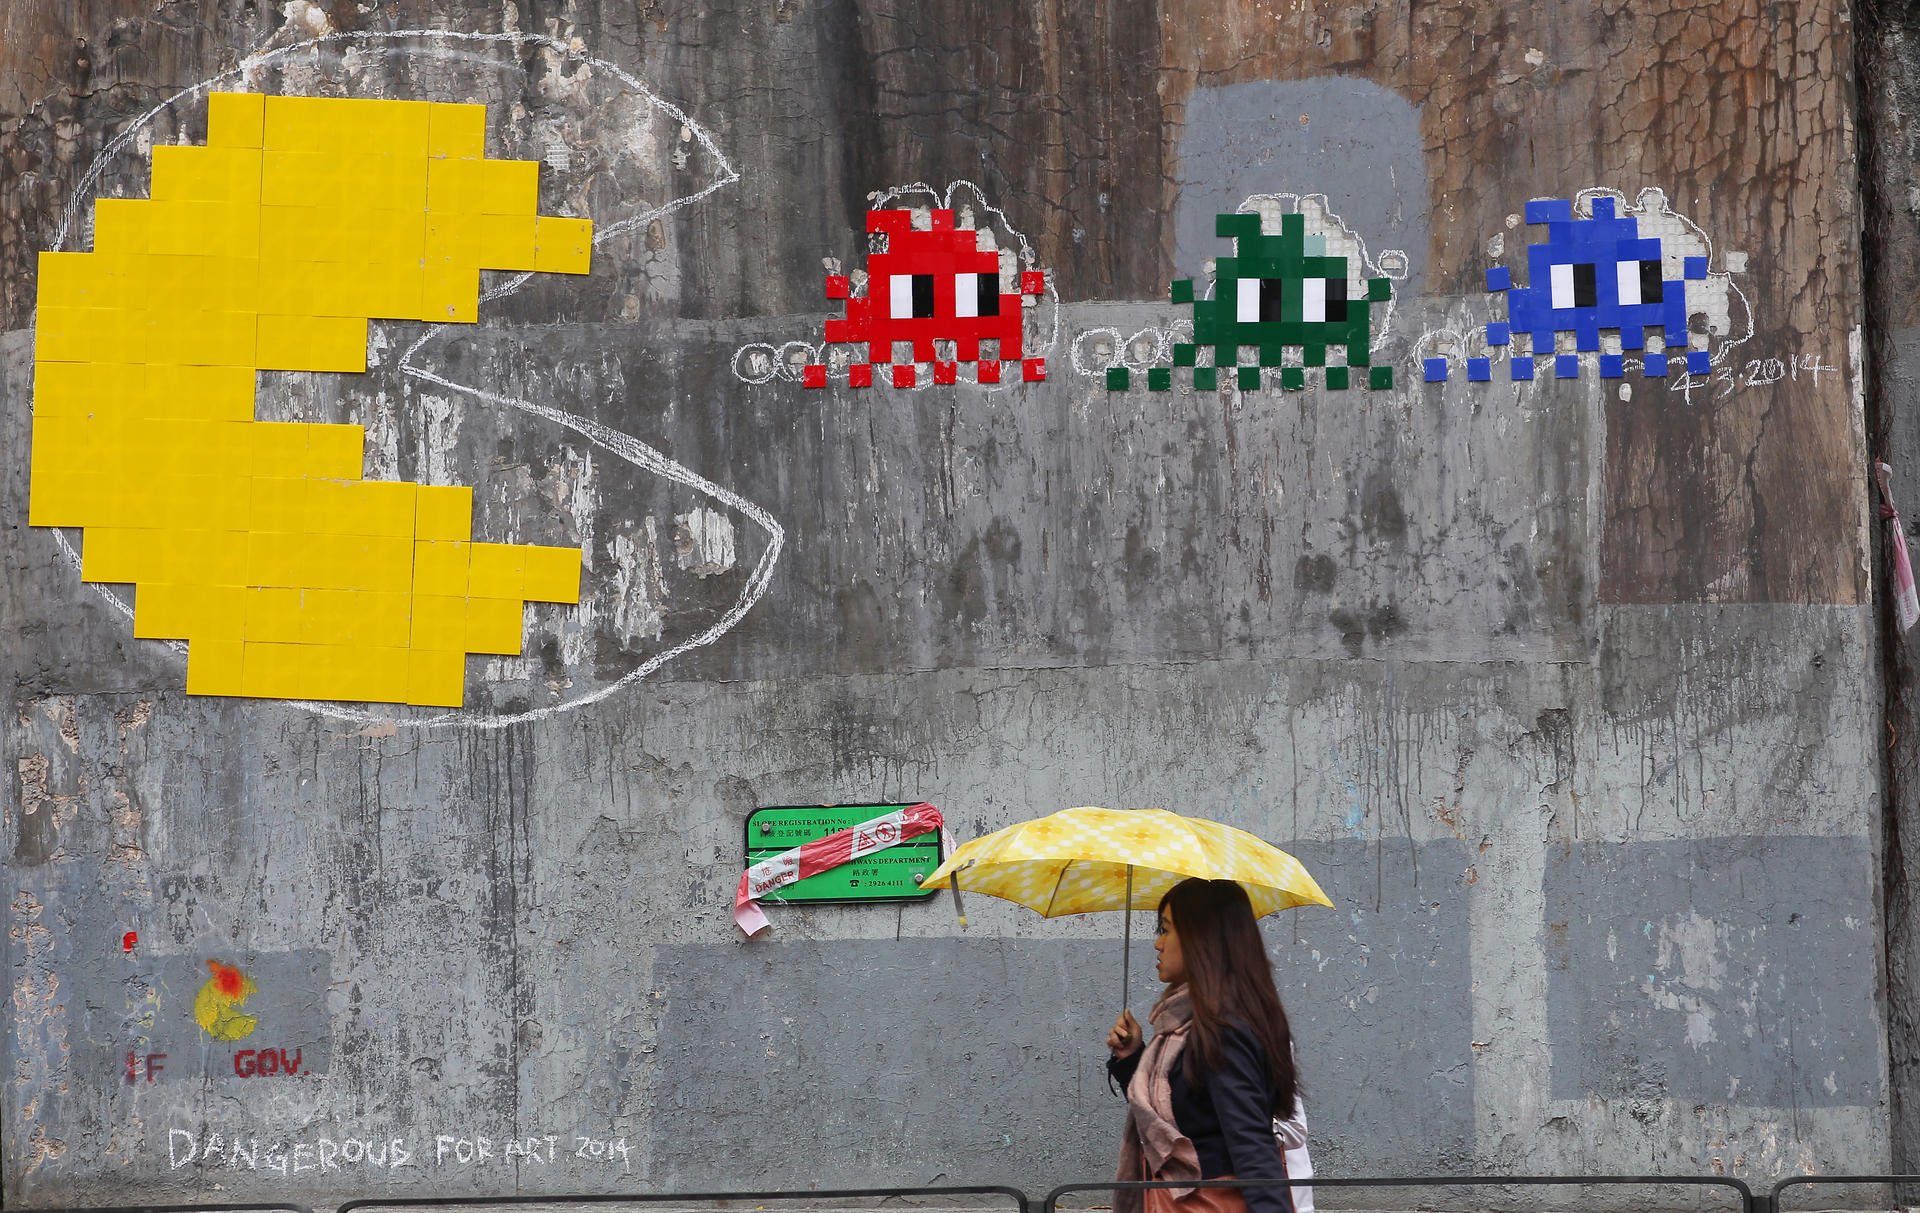 Wall art by Invader in Fortress Hill. Photo: Nora Tam